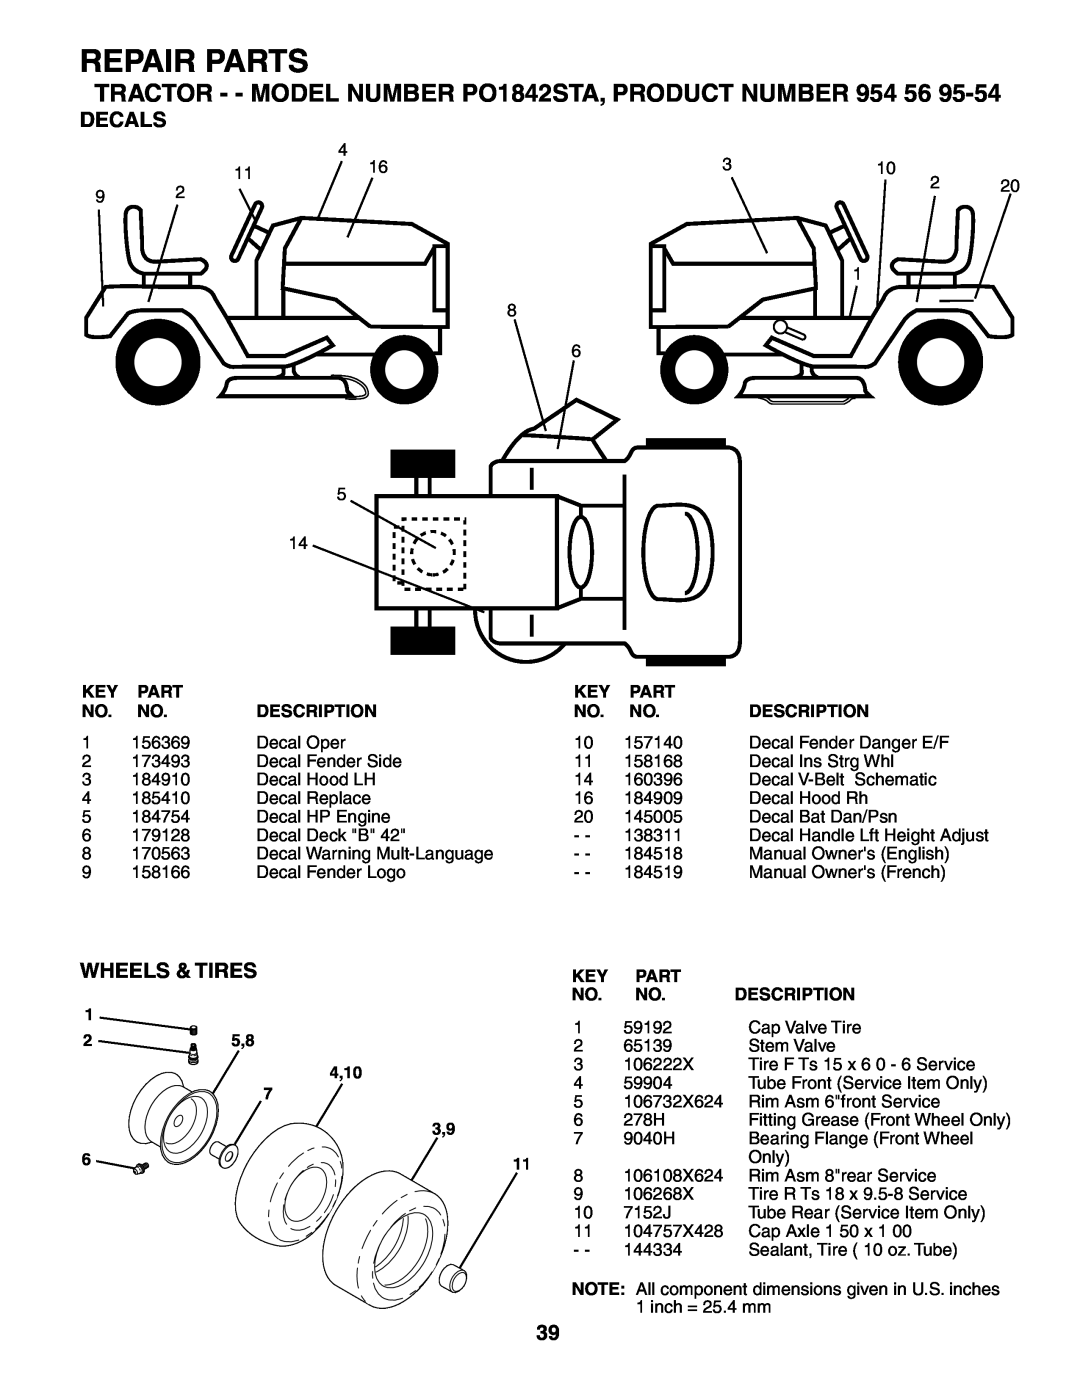 Poulan manual Decals, Wheels & Tires, Repair Parts, TRACTOR - - MODEL NUMBER PO1842STA, PRODUCT NUMBER 954 